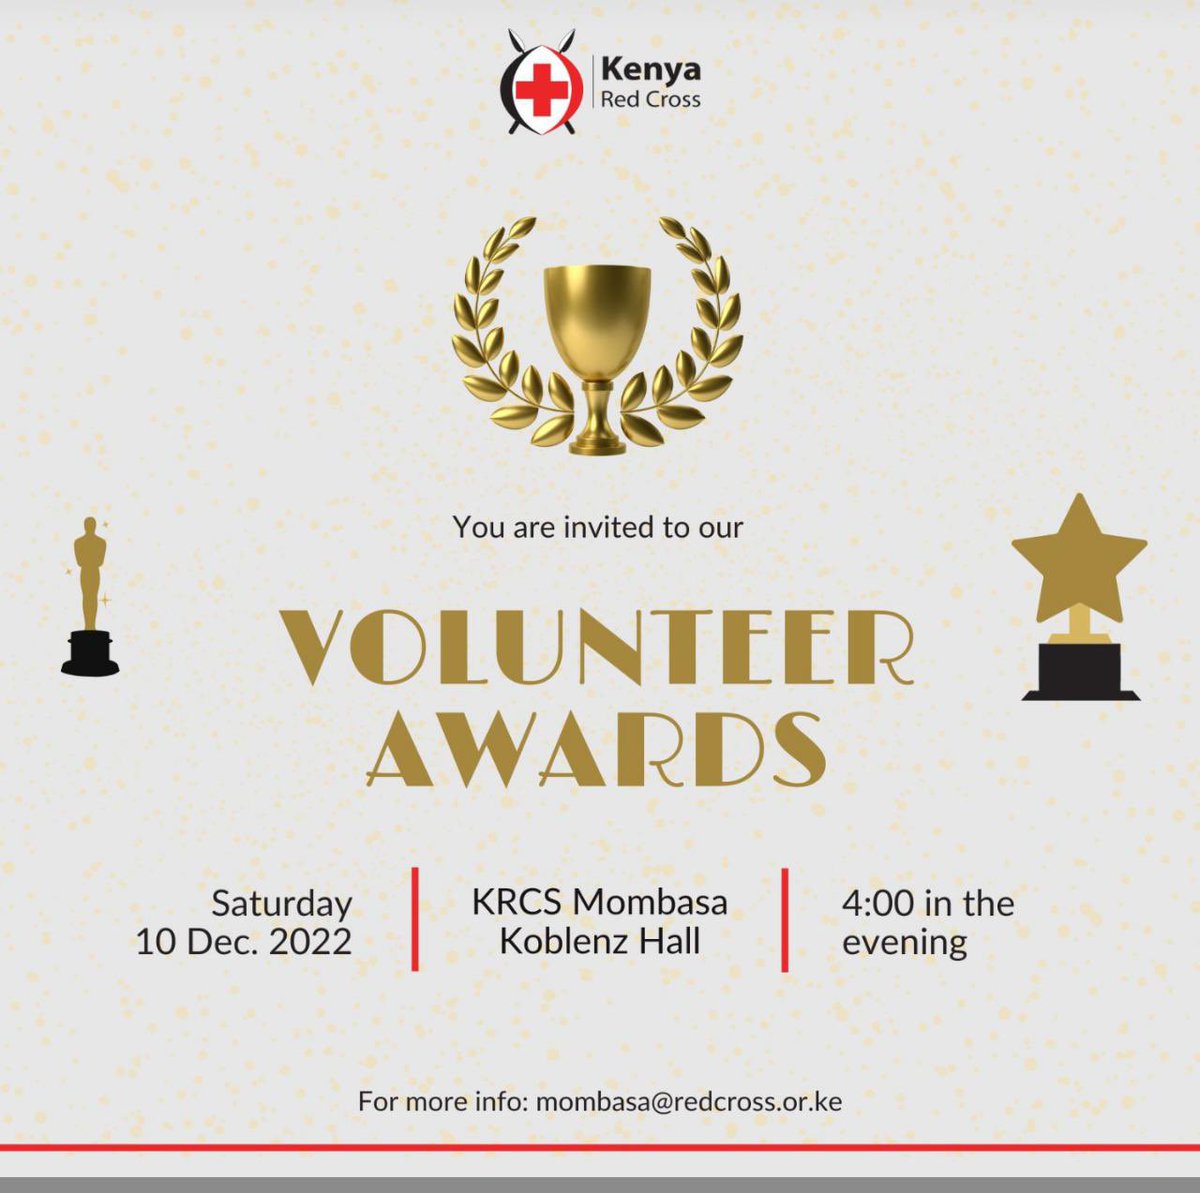 The Kenya Red Cross Mombasa Branch will host a special evening today, to celebrate the hard work and dedication of our volunteers across #Mombasa County and to show our appreciation for everything they have done.👏🏽

#KRCSVolunteerAwards